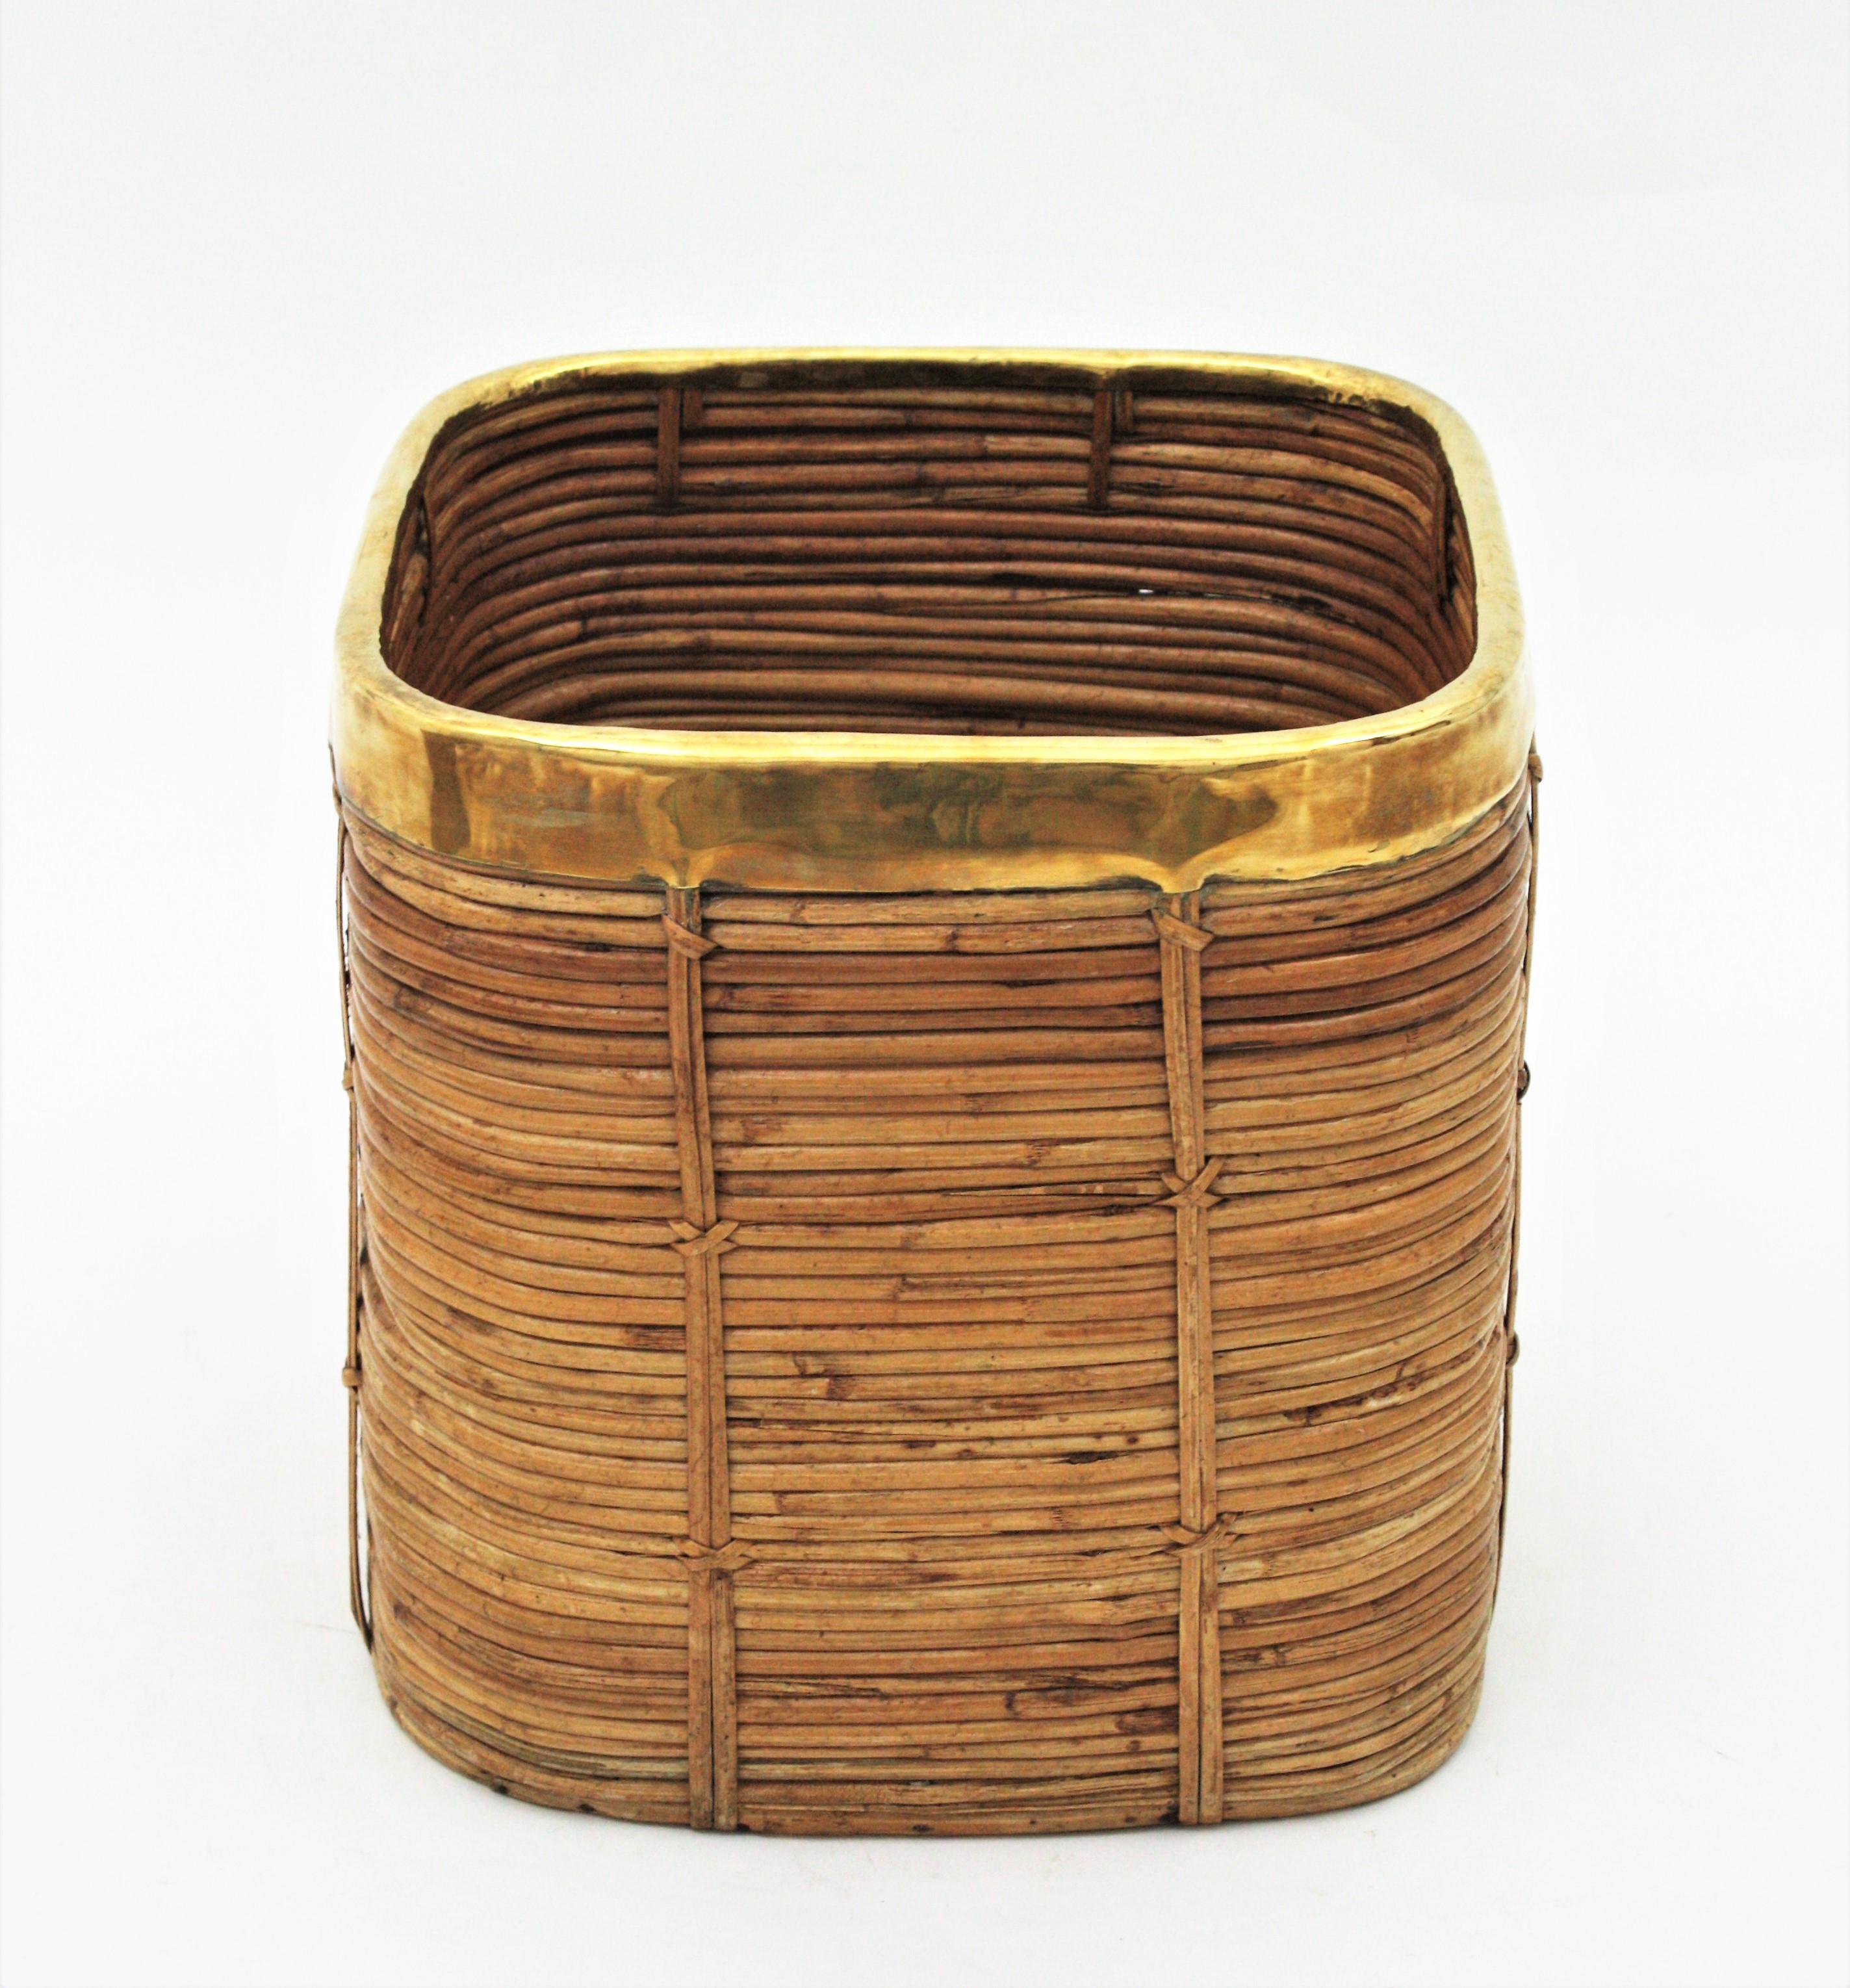 Three Rattan Bamboo Planters / Baskets with Brass Rim, Italy, 1970s For Sale 1